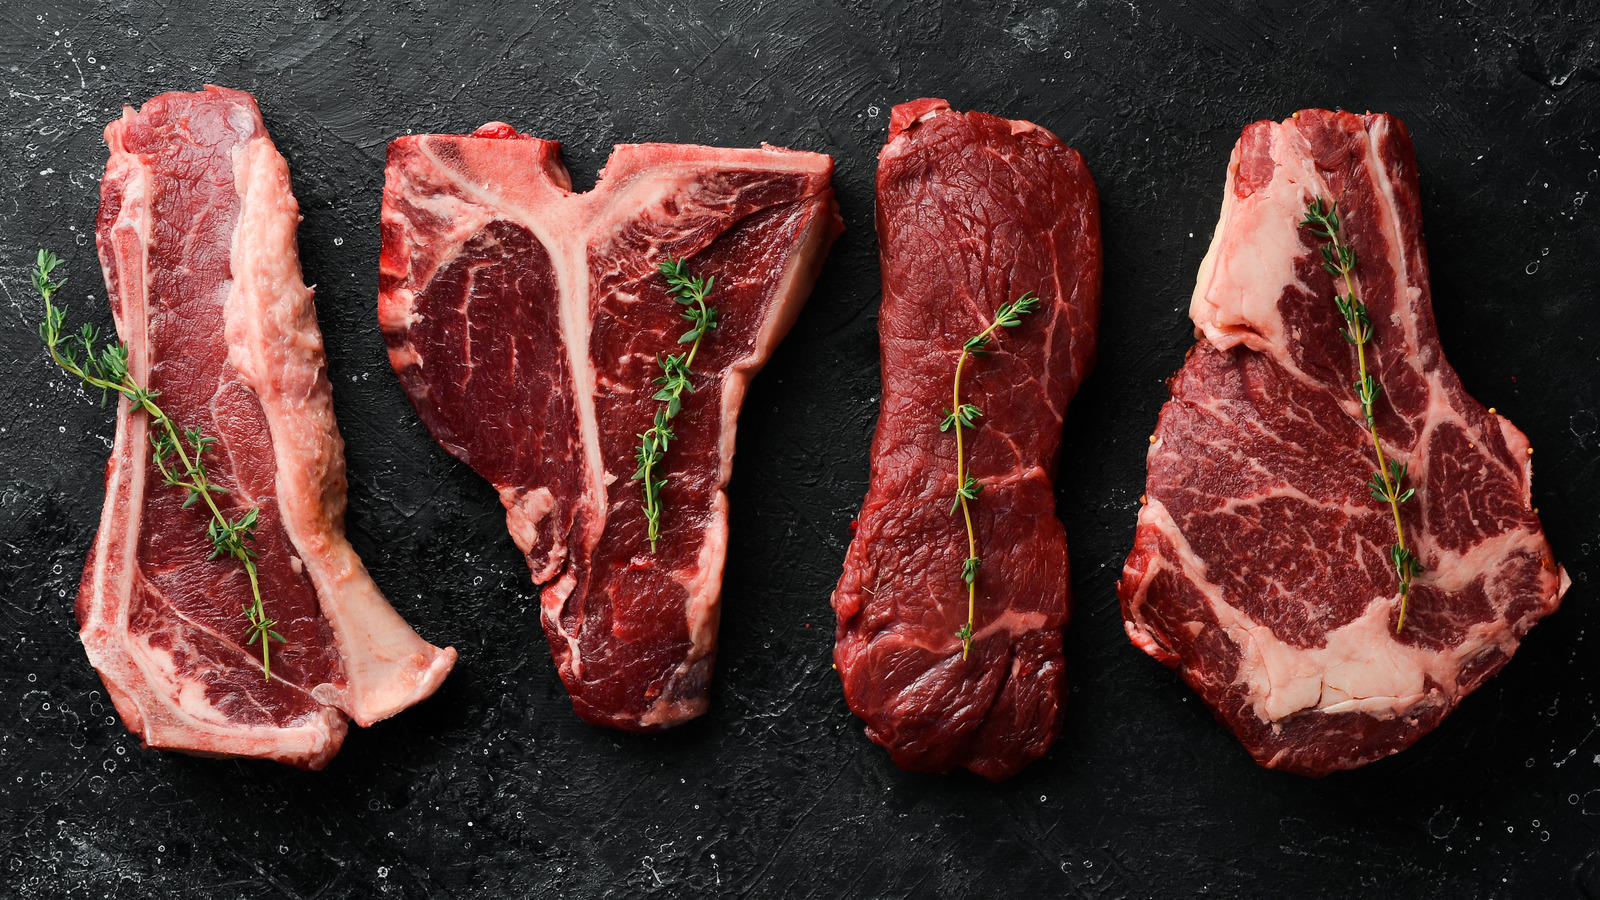 Ranking The Cheapest Cuts Of Steak, From Worst To Best